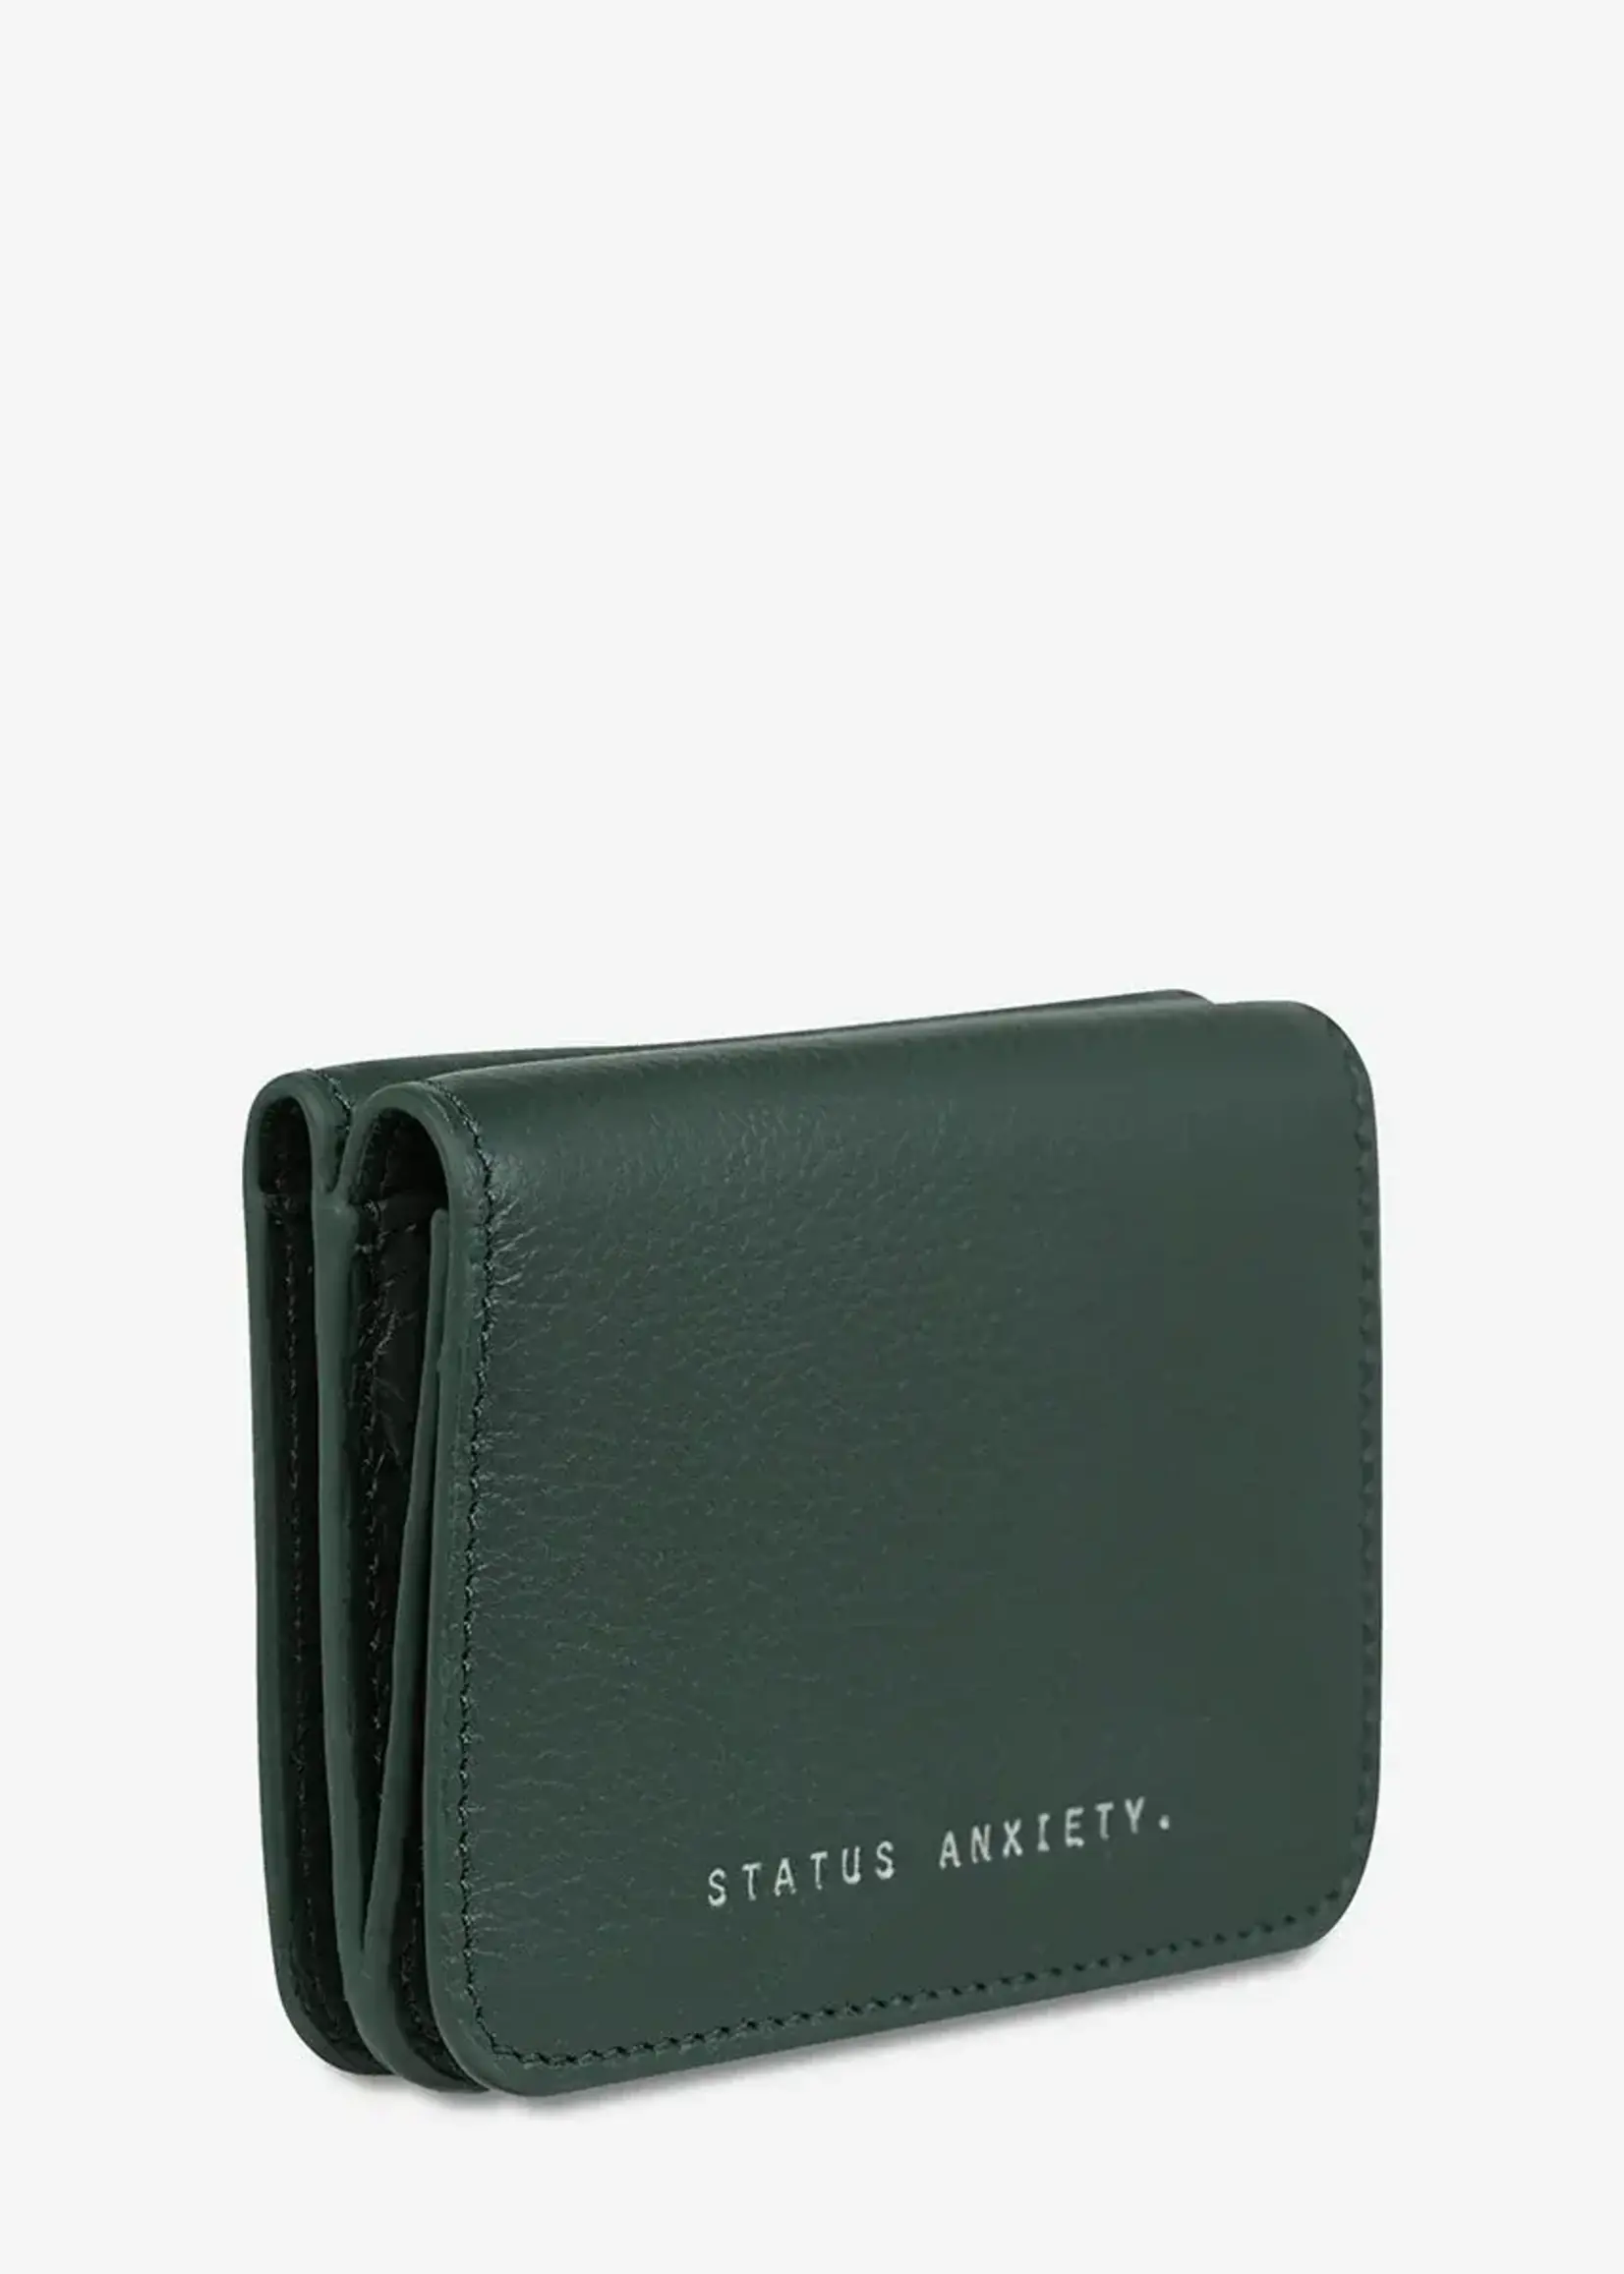 Status Anxiety Miles Away Wallet